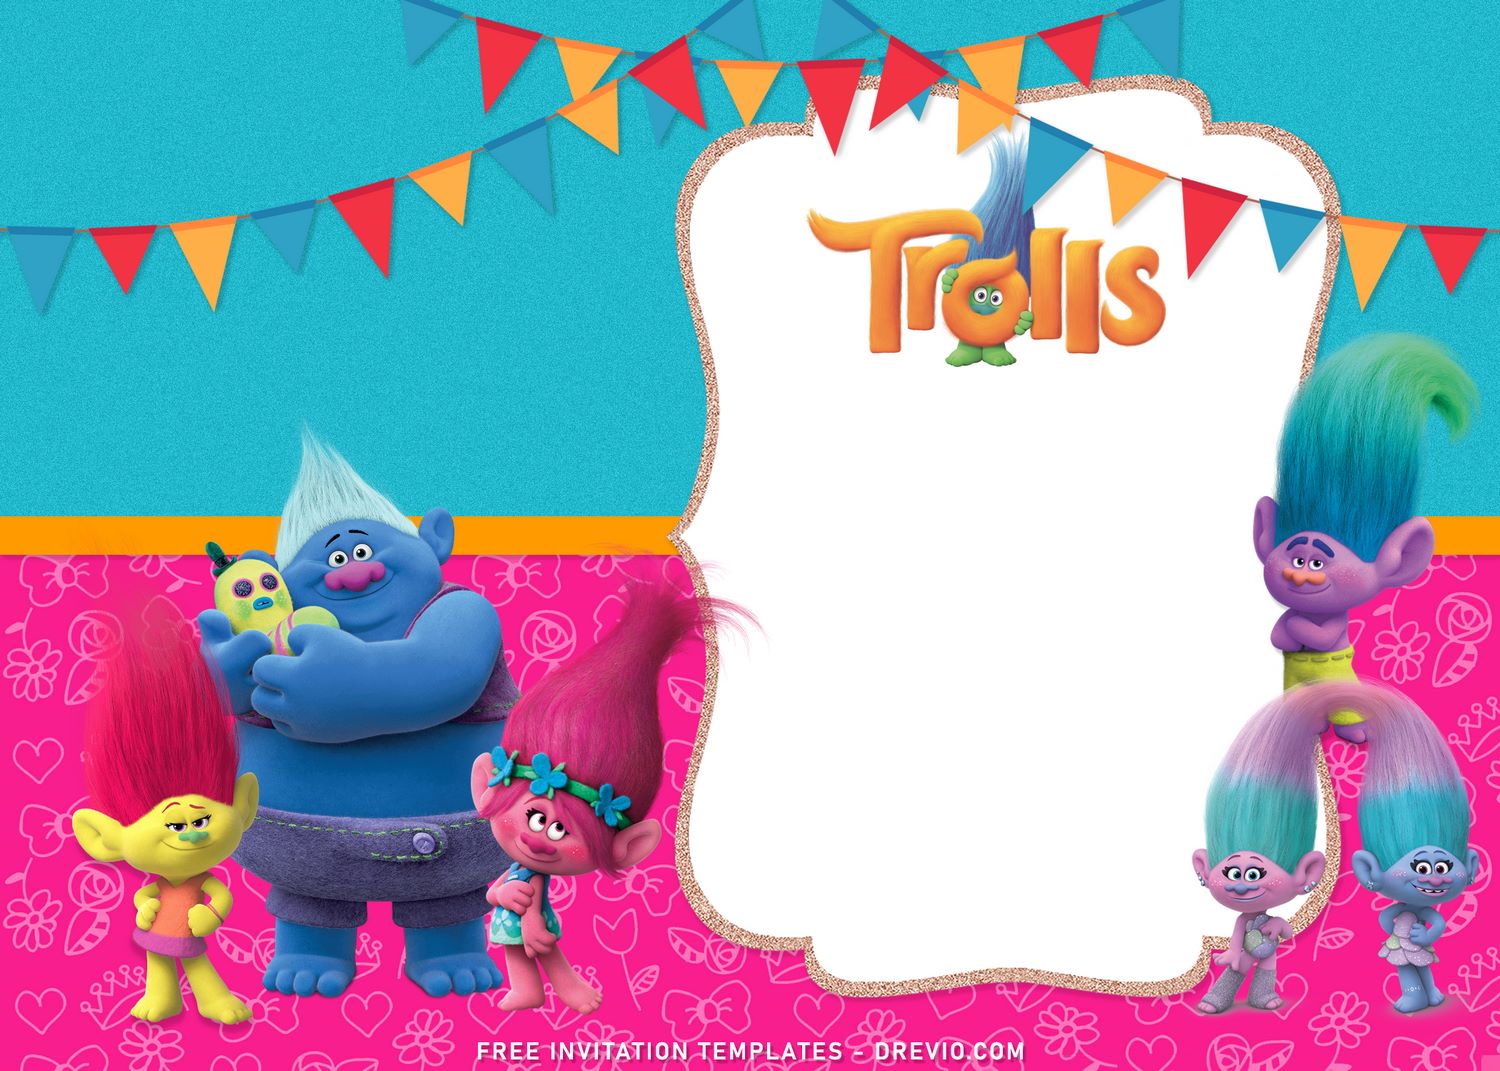 8-adorable-trolls-birthday-invitation-templates-for-your-kid-s